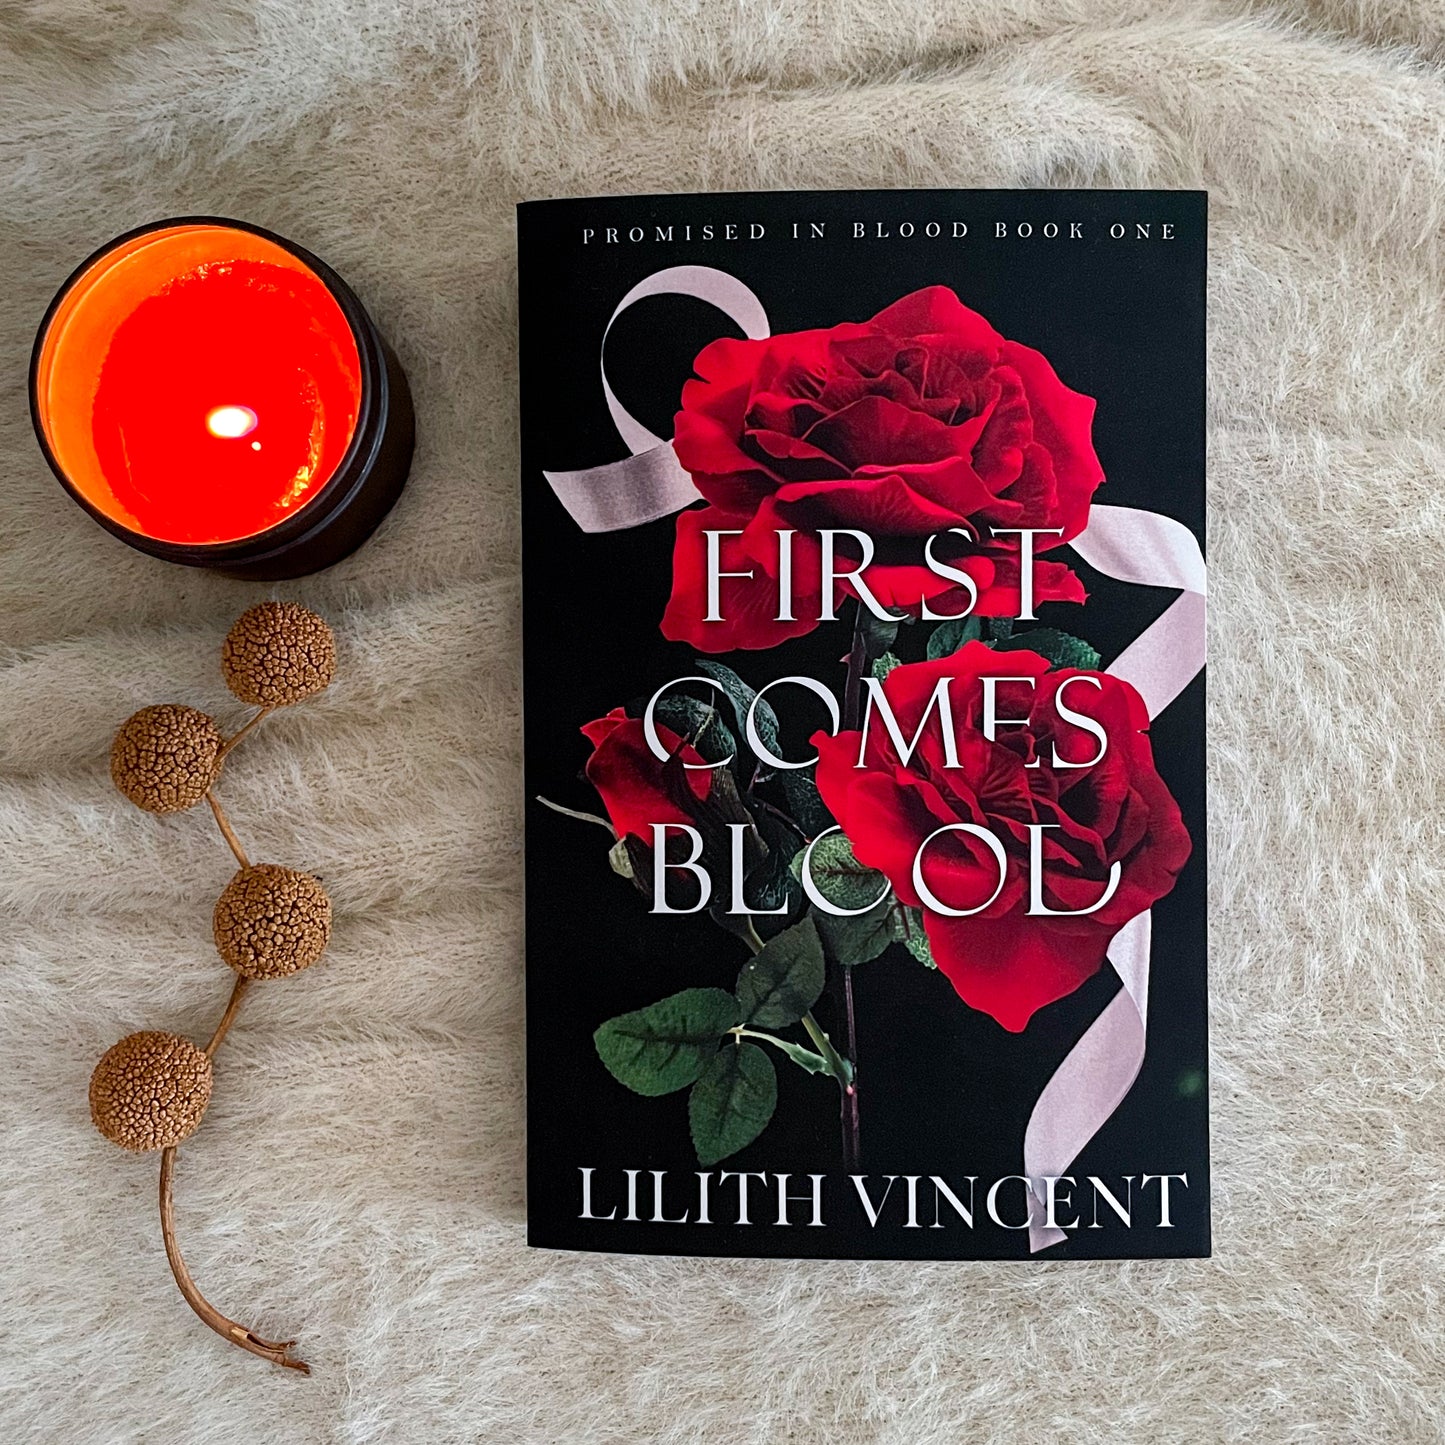 Promised in Blood series (Special Editions) by Lilith Vincent